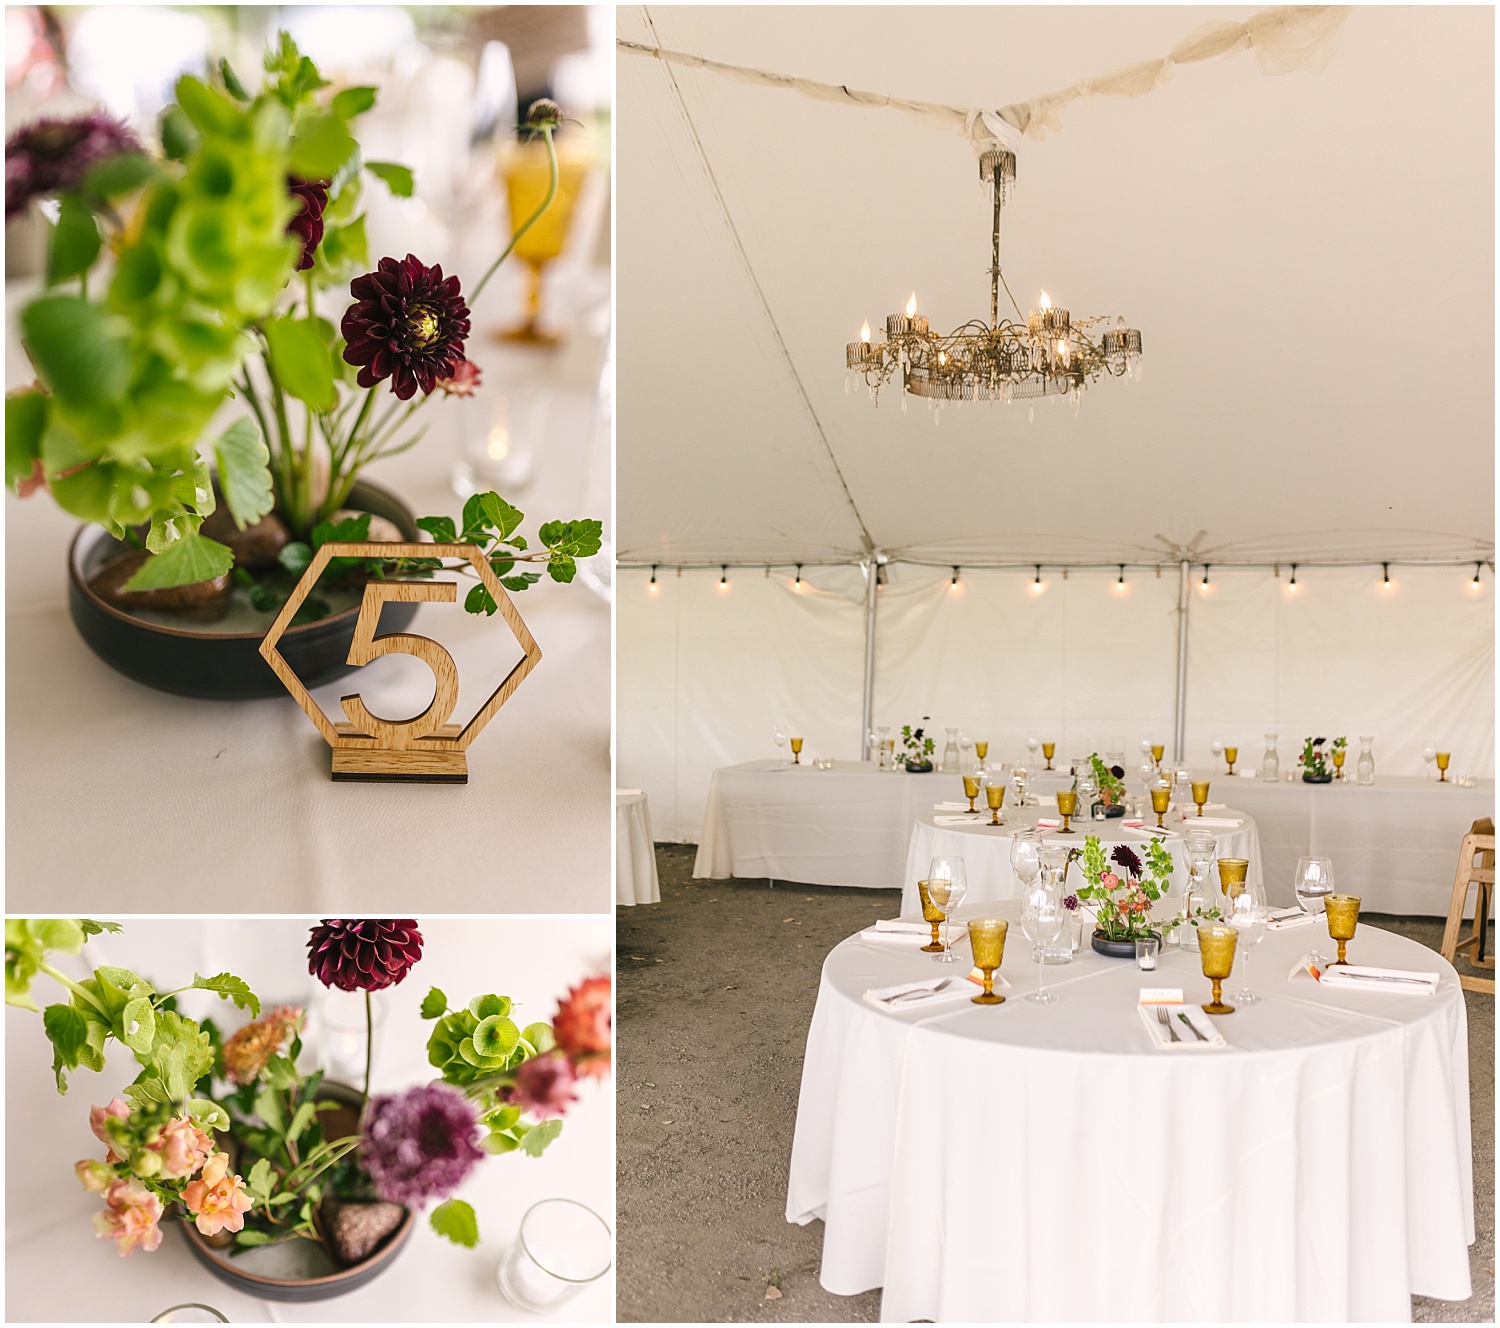 Minimalist floral centerpieces by Rowdy Poppy for beautiful enchanted garden wedding at Pastures of Plenty